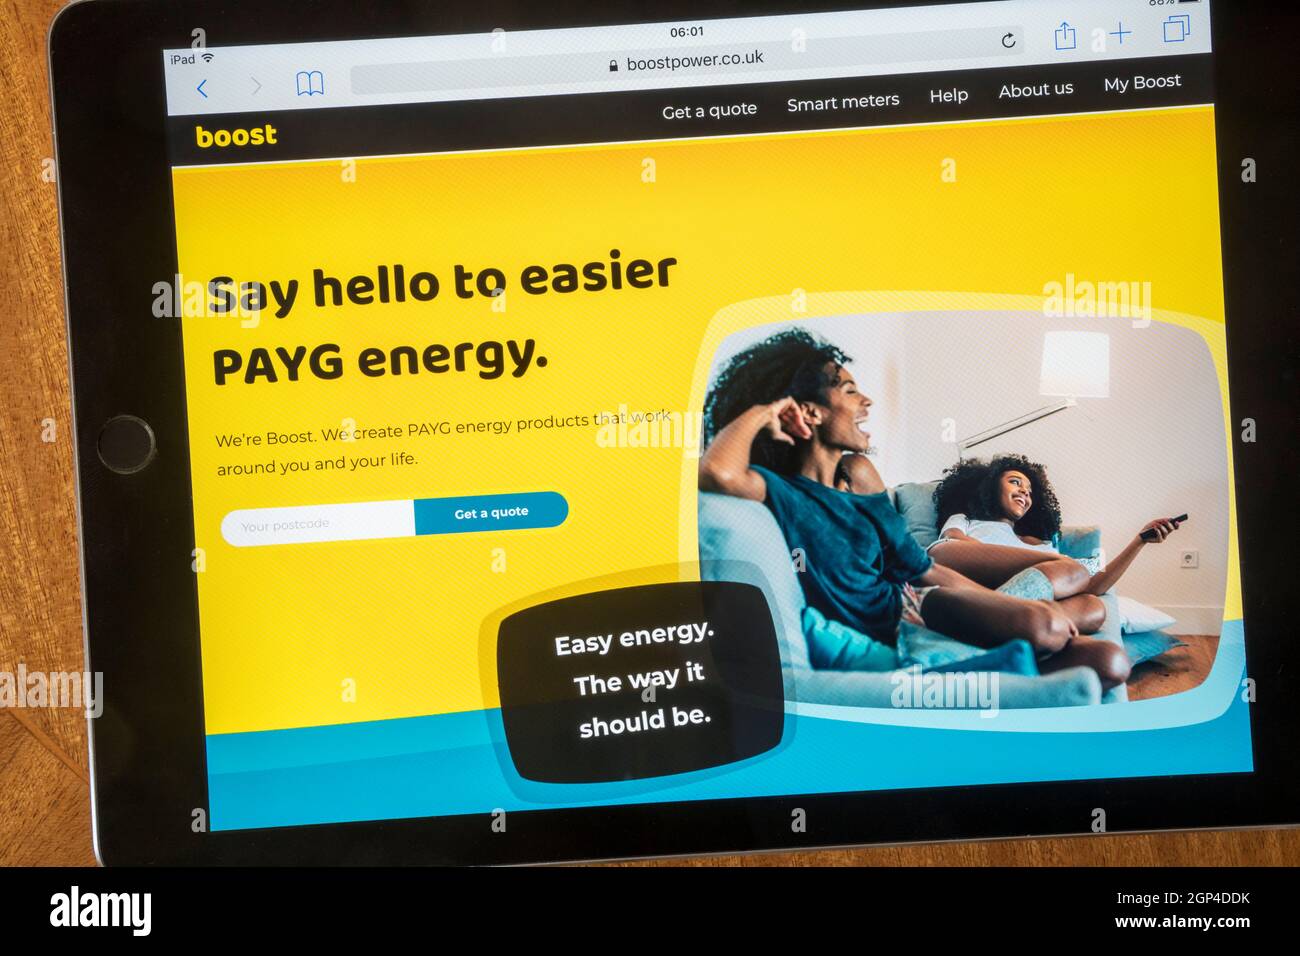 The homepage of Boost the Pay As You Go PAYG energy company. Stock Photo